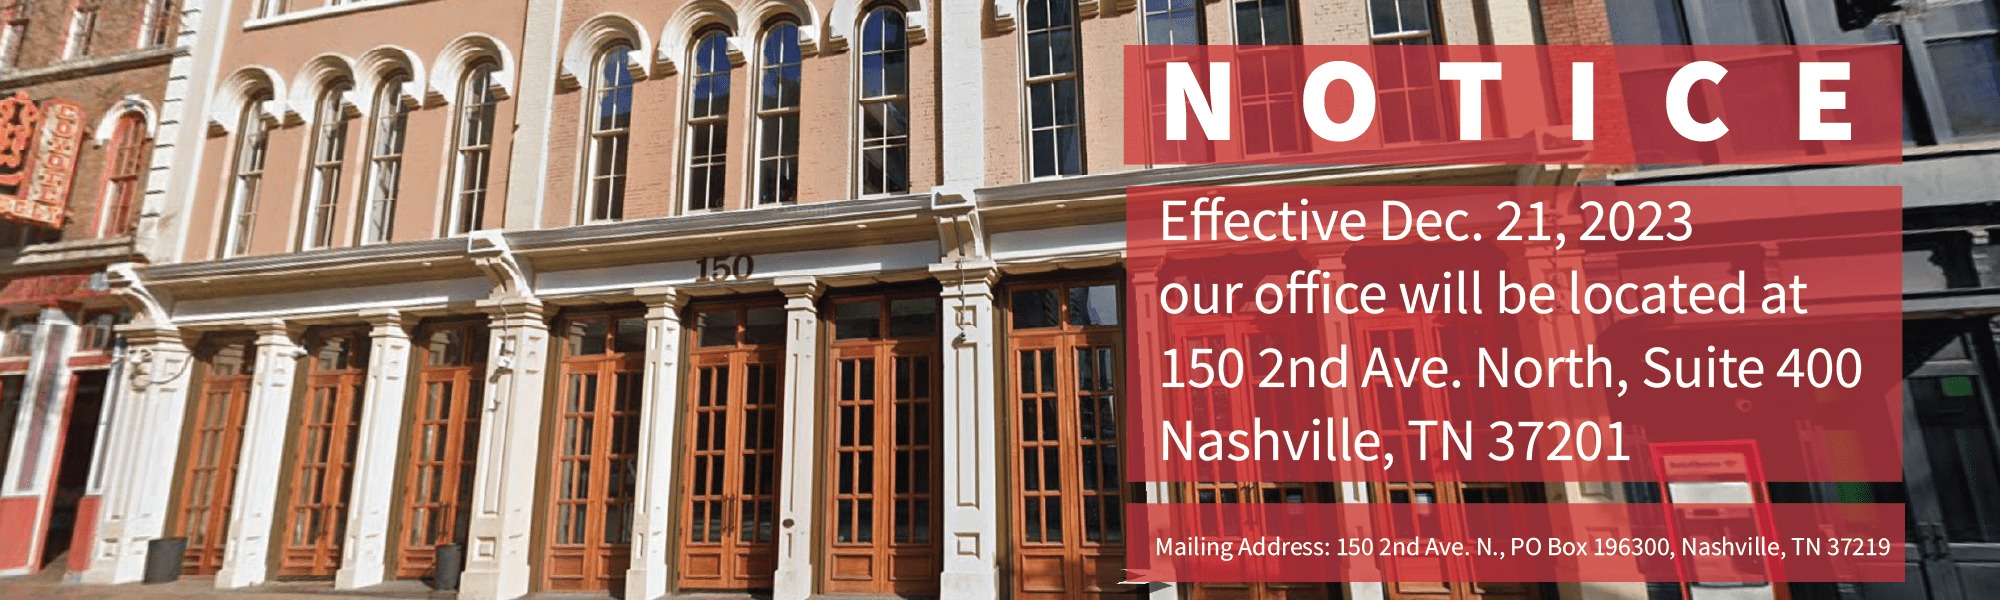 NOTICE: Effective December 21, 2023, the Office of the Public Defender will be physically located at
150 2nd Ave N., Suite 400
Nashville, TN 37201
 
Additionally, our mailing address will be updated to: 150 2nd Ave. N., PO Box 196300, Nashville, TN 37219